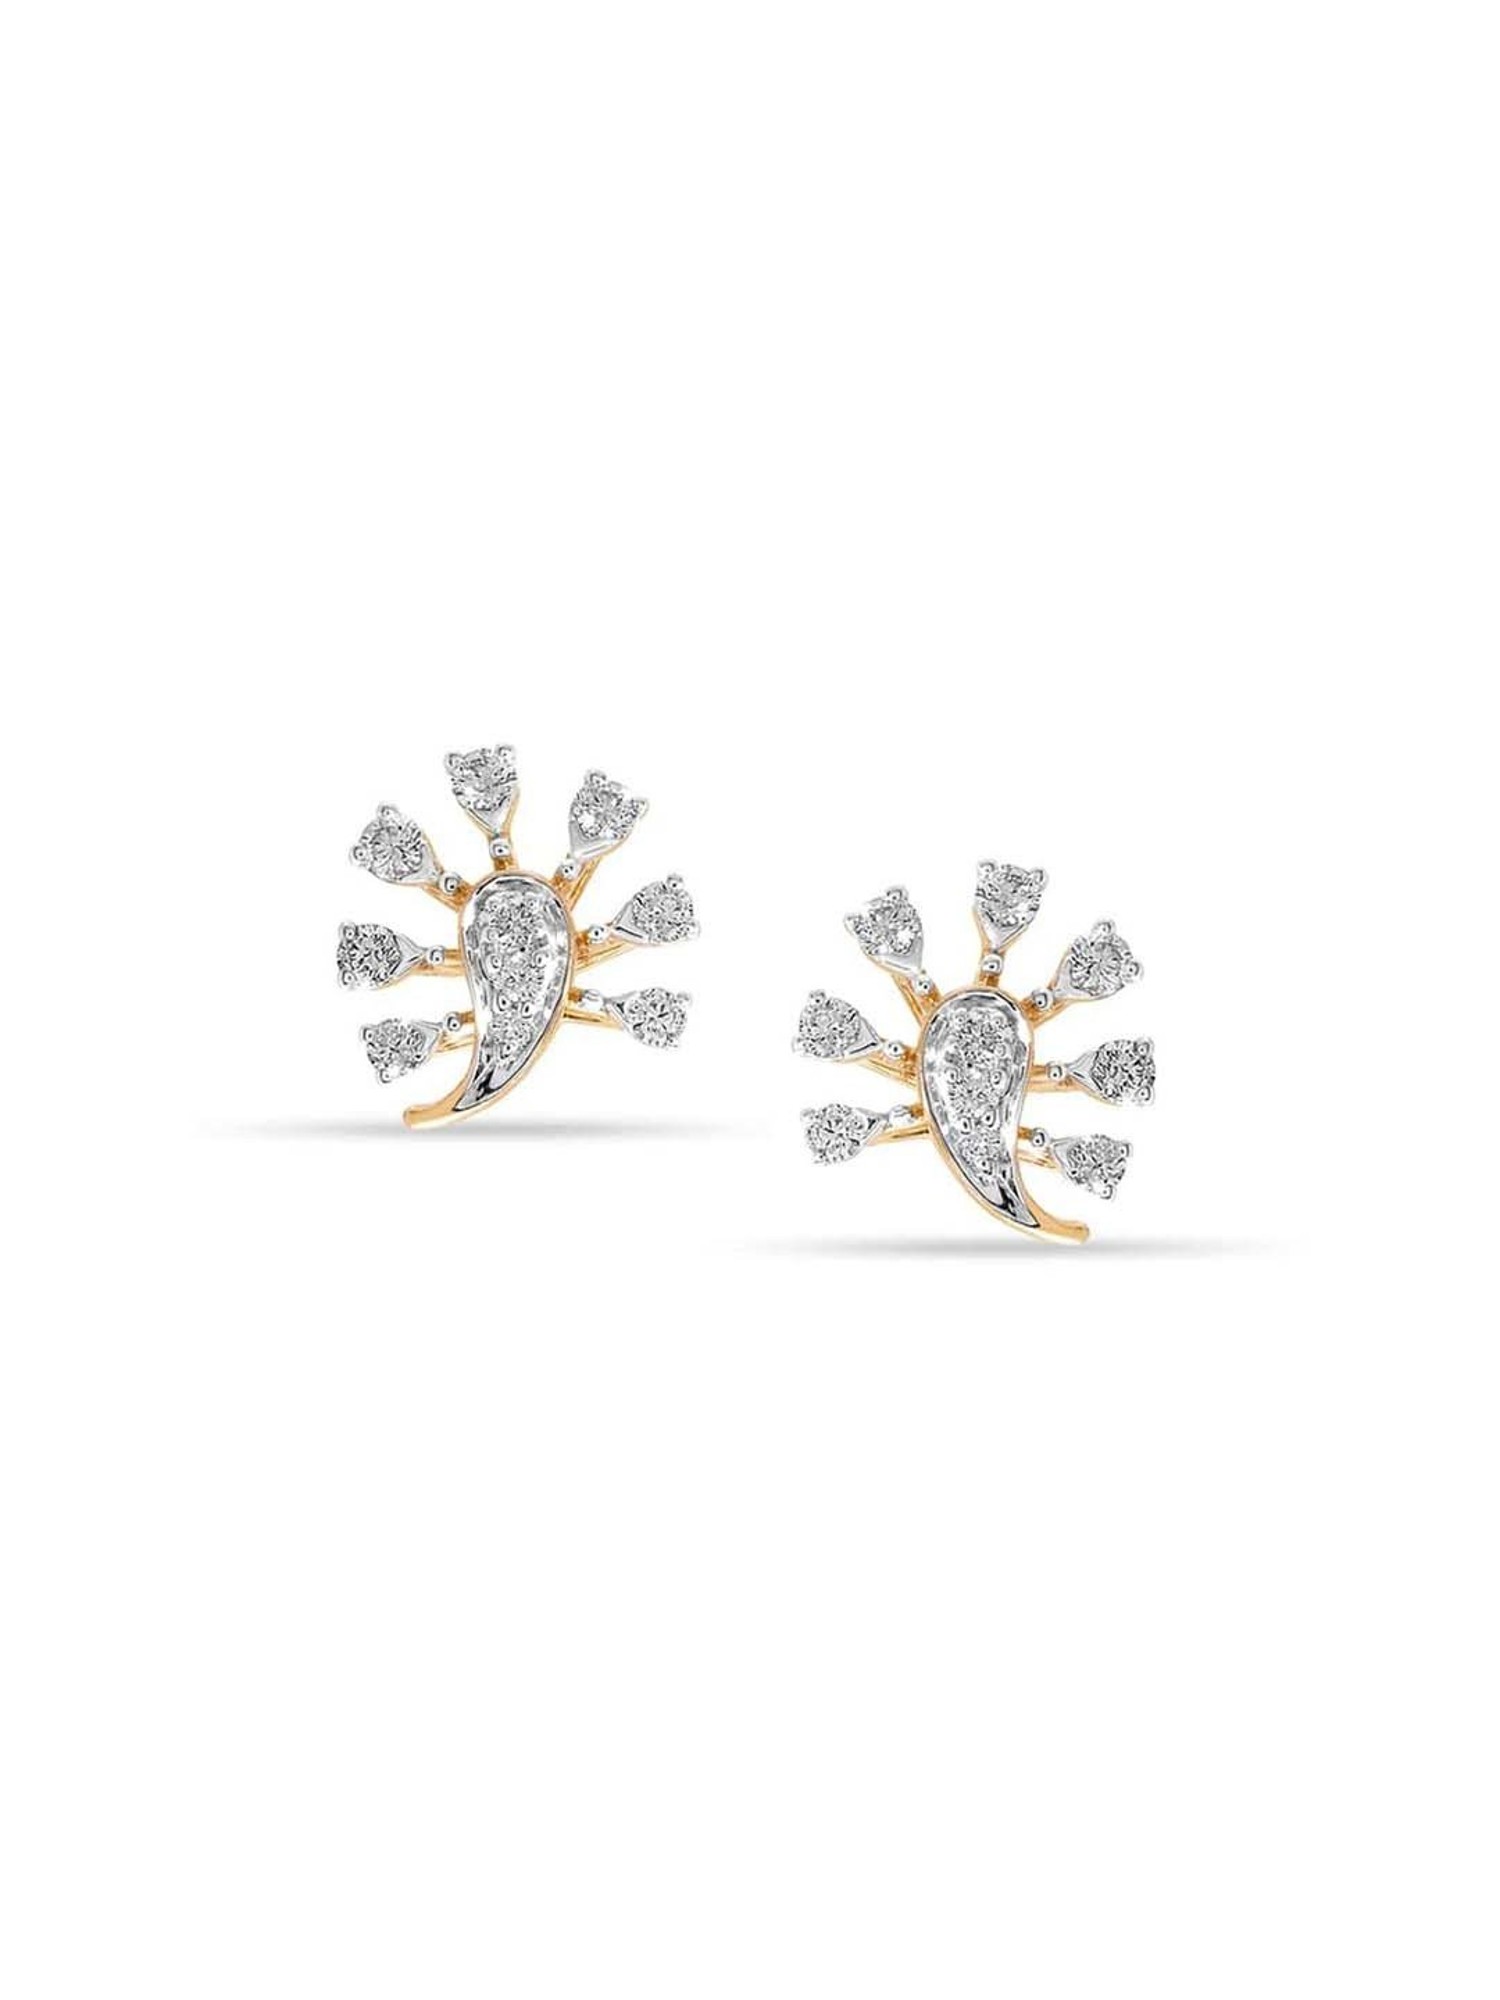 Spectacular White Gold and Diamond Stud Earrings